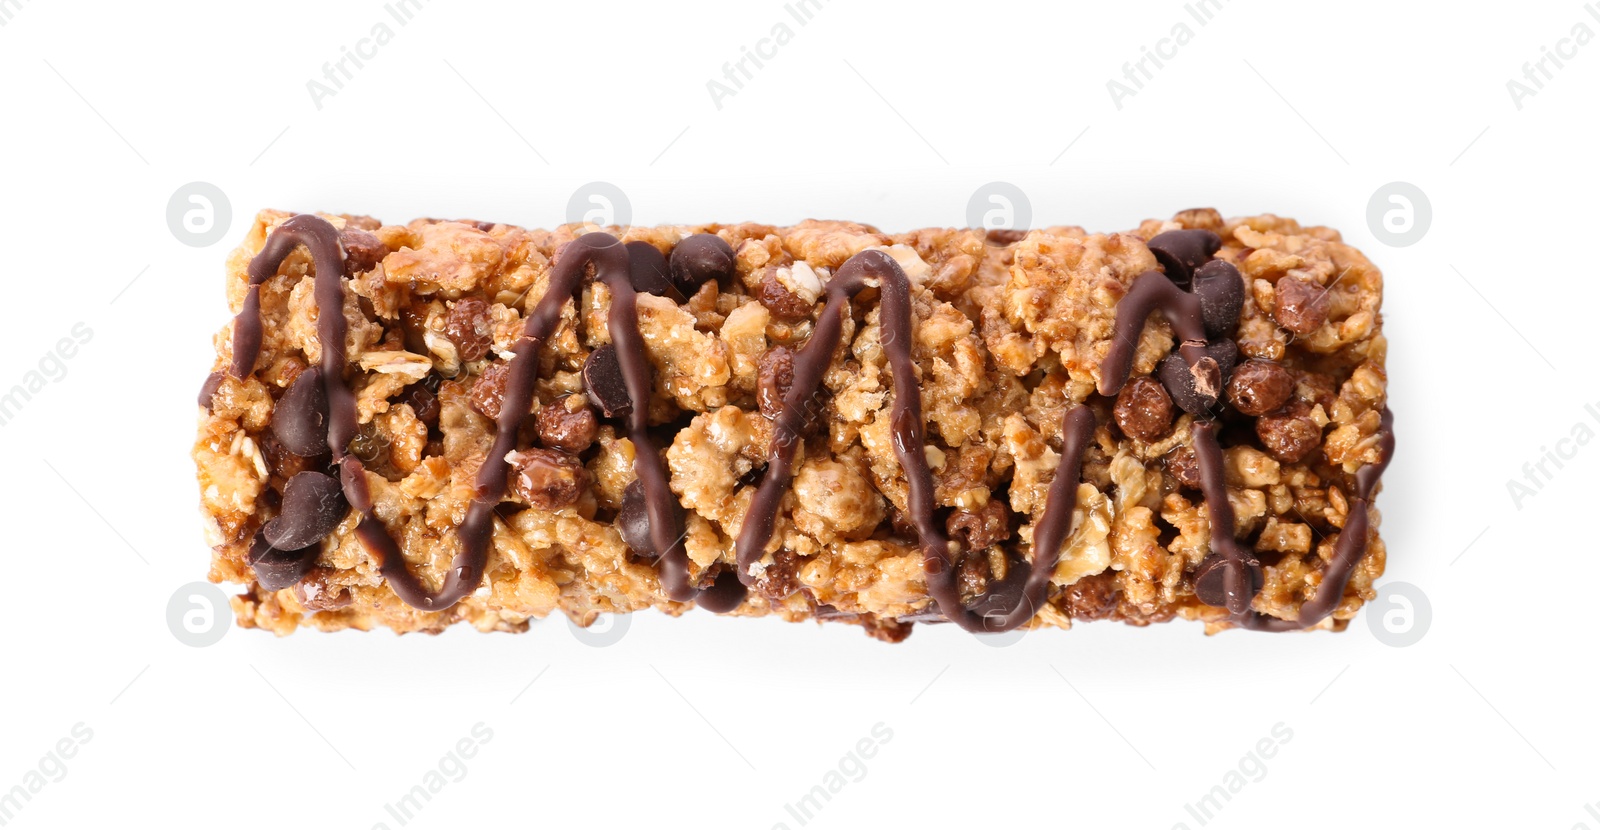 Image of Crunchy granola bar with chocolate on white background, top view